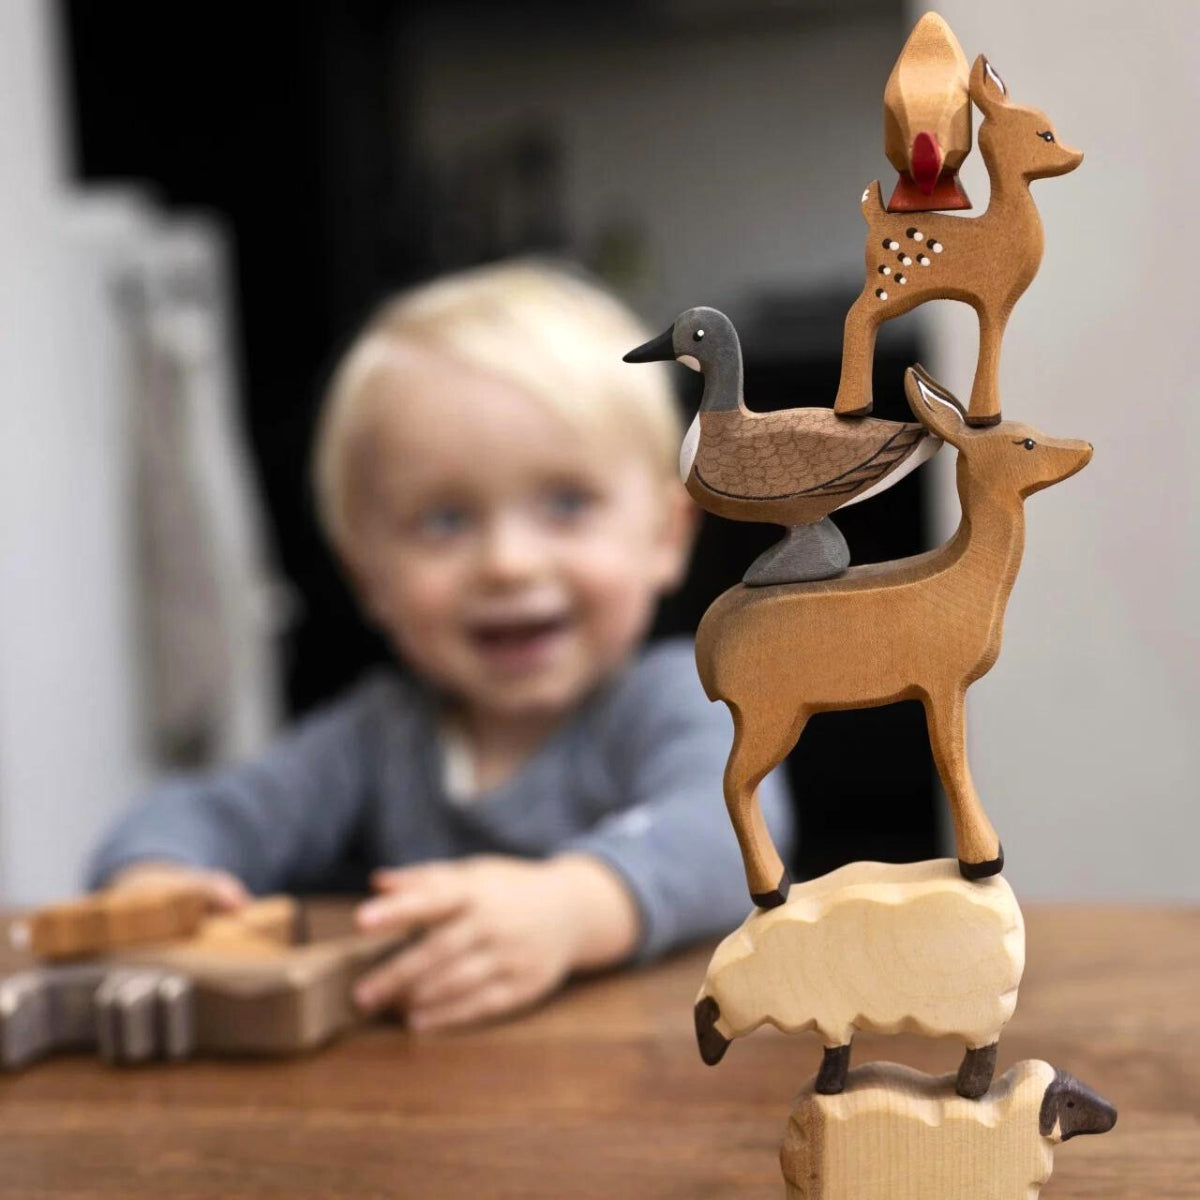 BumbuToys Handcrafted Wooden Animal Deer Doe from Australia in a small-world play setting